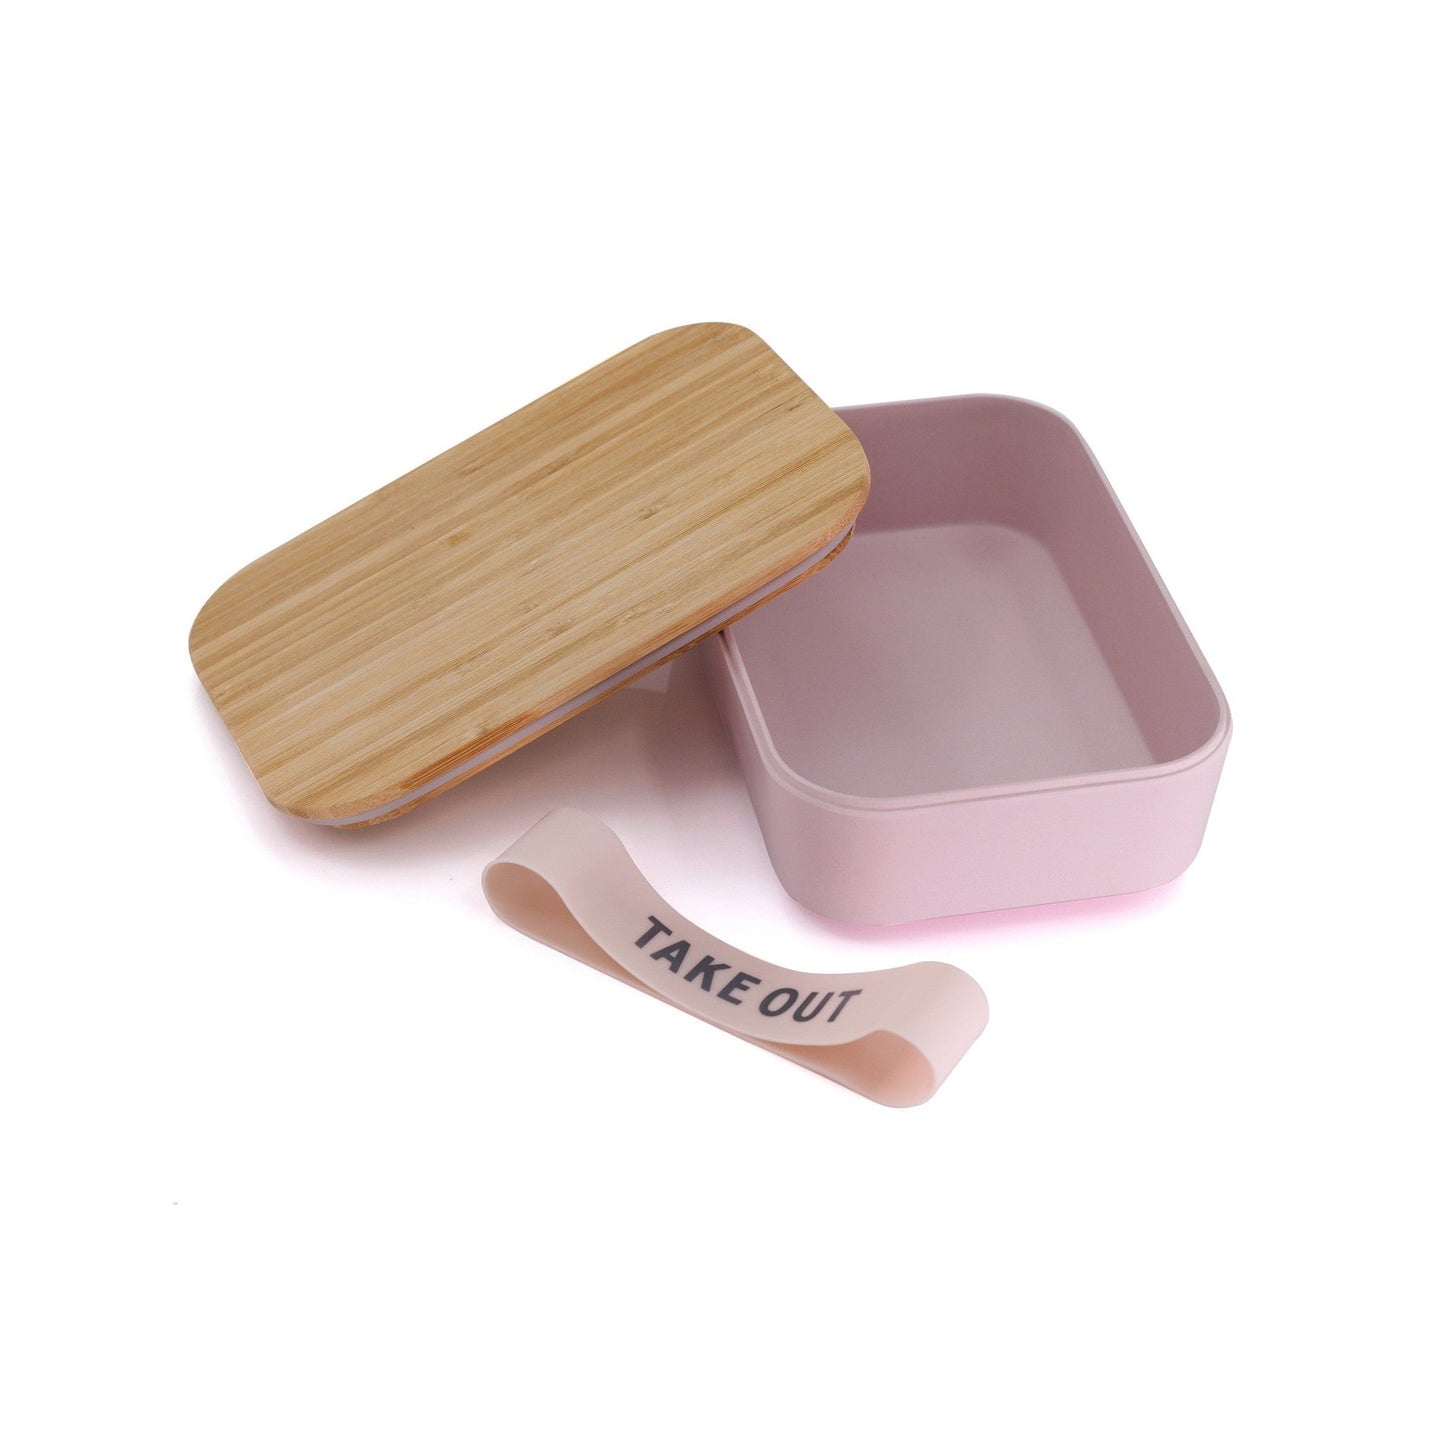 Pack of 3 Take Out Bamboo Lunch Box in Blush Pink | Eco-Friendly and Sustainable | 7.5" x 5" x 2"